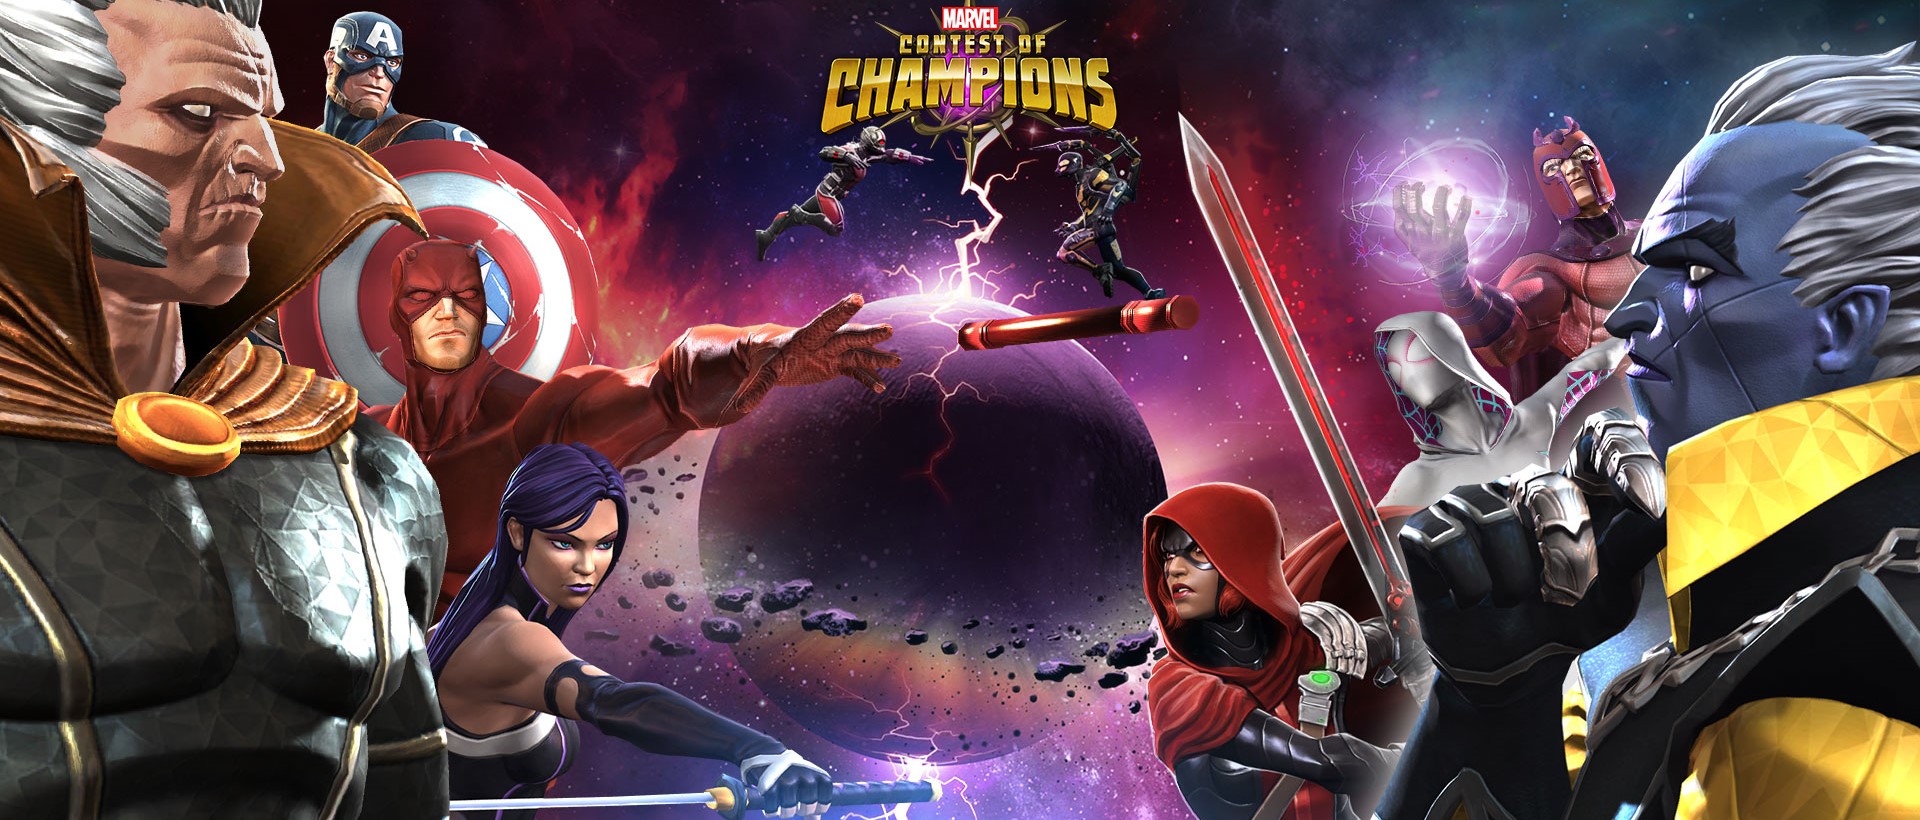 Download Marvel Contest of Champions on PC with NoxPlayer